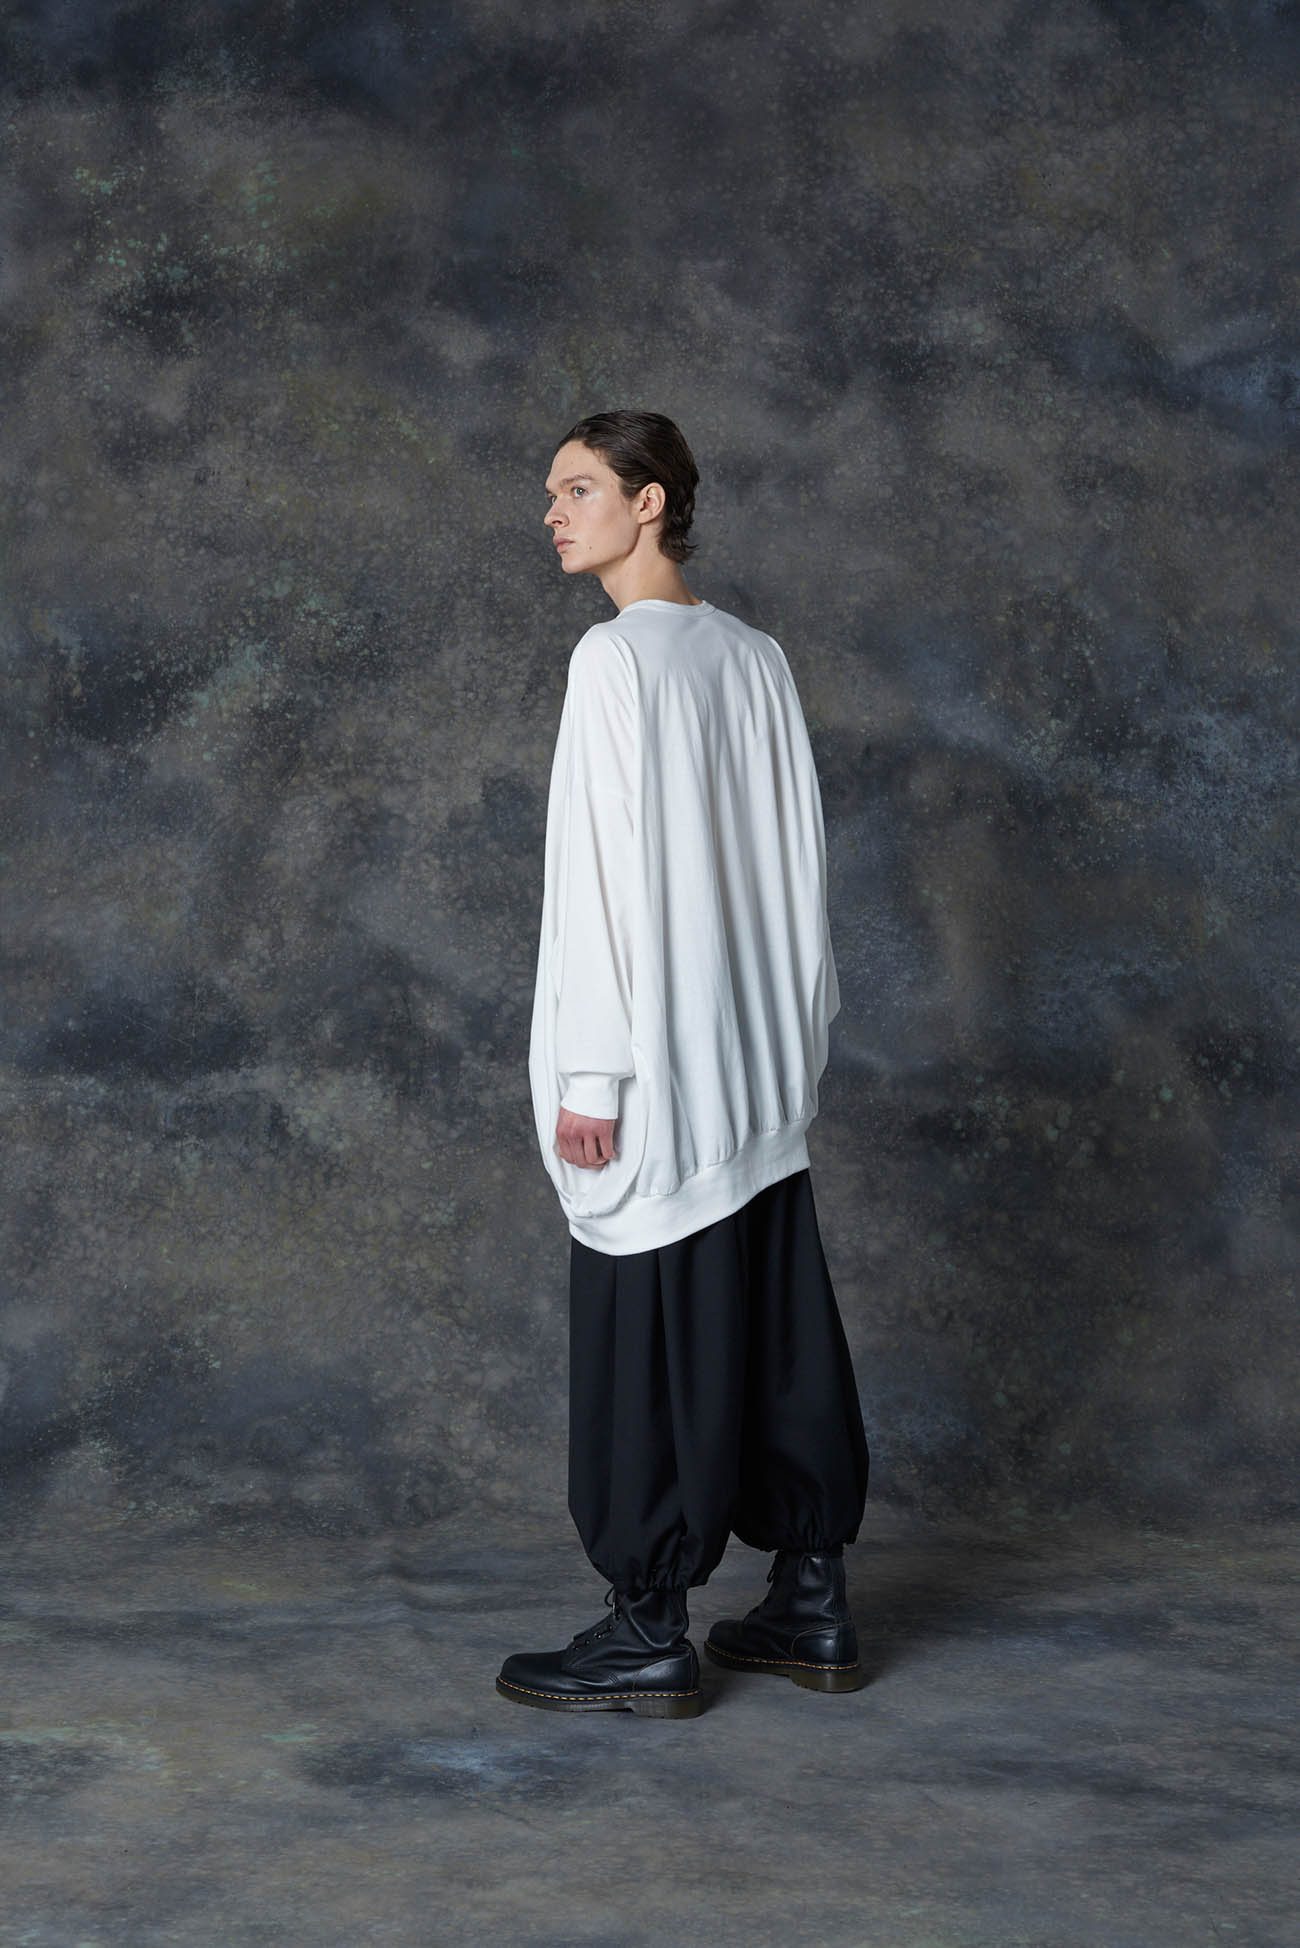 30/cotton jersey Asymmetry q neck T long sleeves